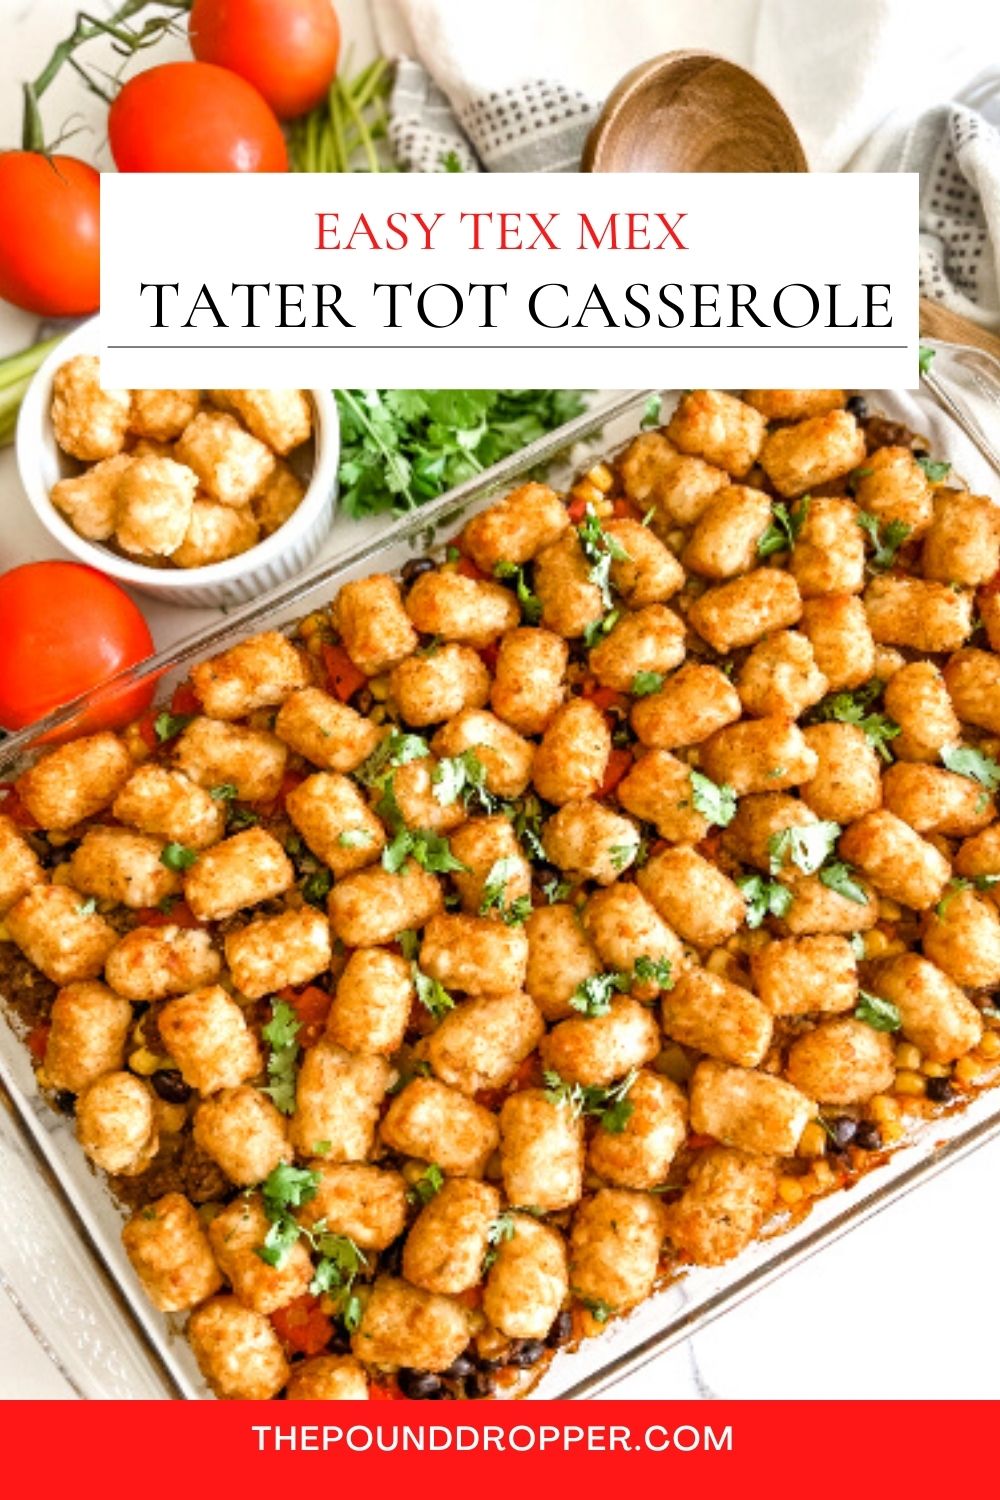 This Tex Mex Tater Tot Casserole recipe is on repeat at our house year round. This tater tot casserole is packed with lean ground beef, black beans, corn, green chilies, diced tomatoes, then covered in a red enchilada sauce and topped with crispy tater tots! It's simple to make and perfect for those busy weeknights!  via @pounddropper